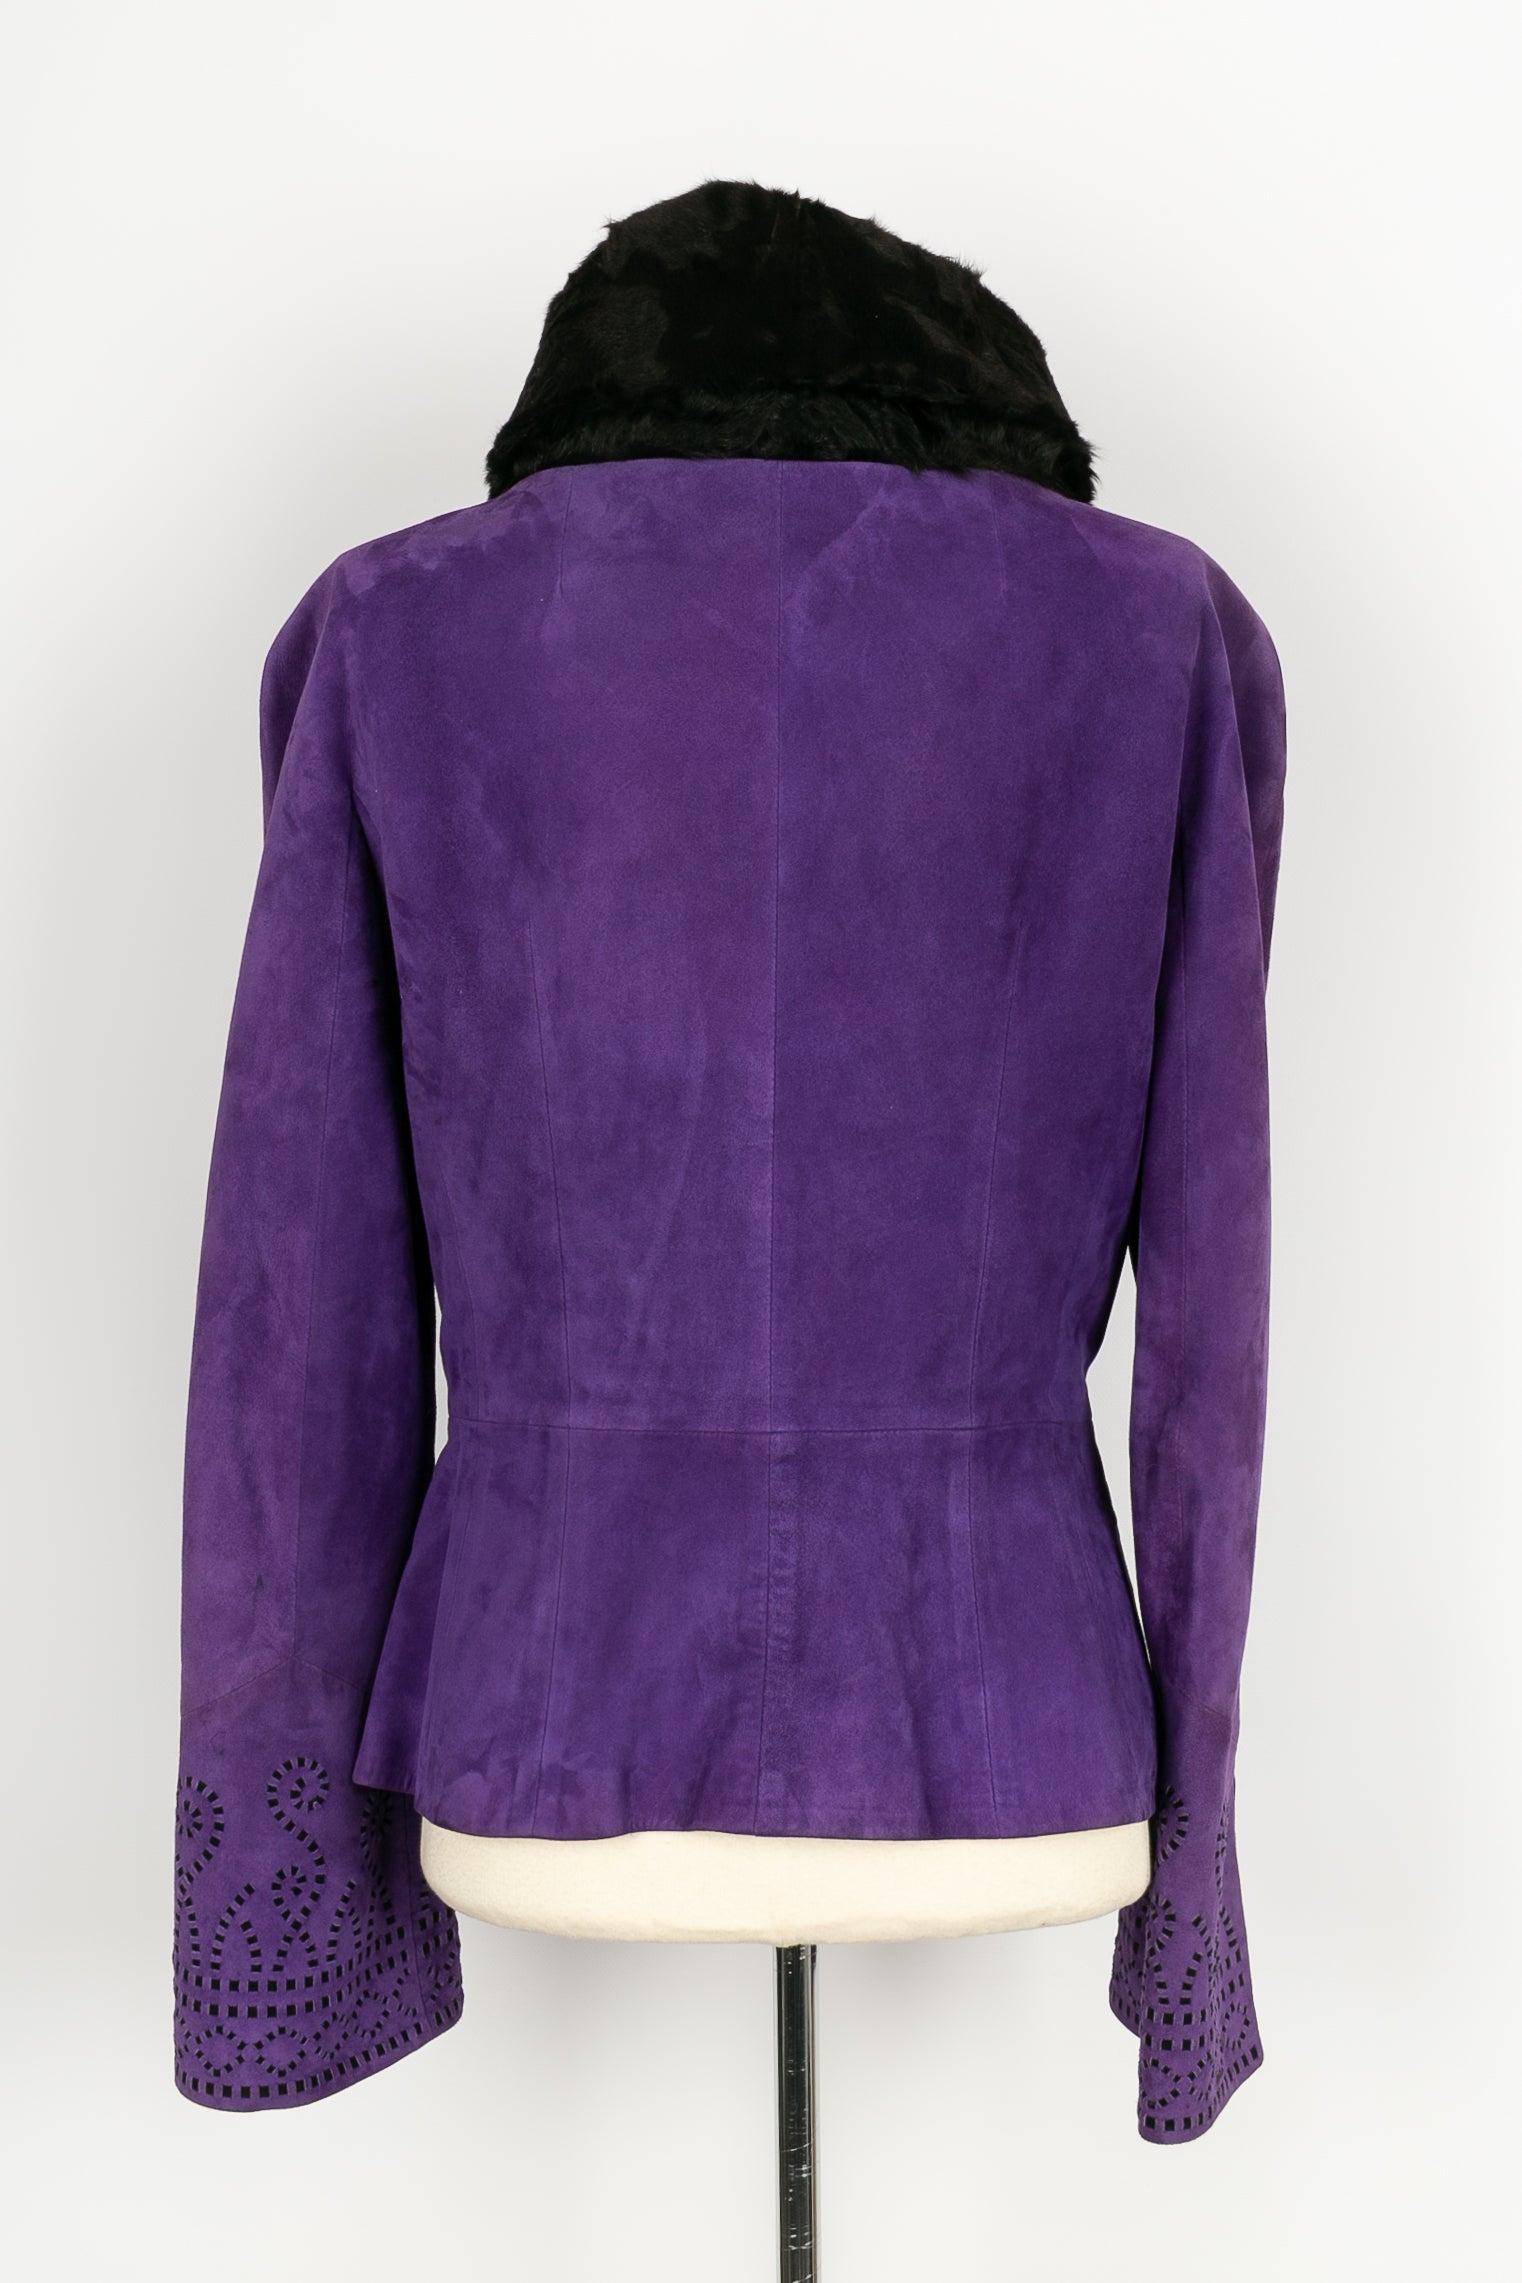 Women's Dior Jacket in Lambskin and Astrakhan Collar, 2009 For Sale